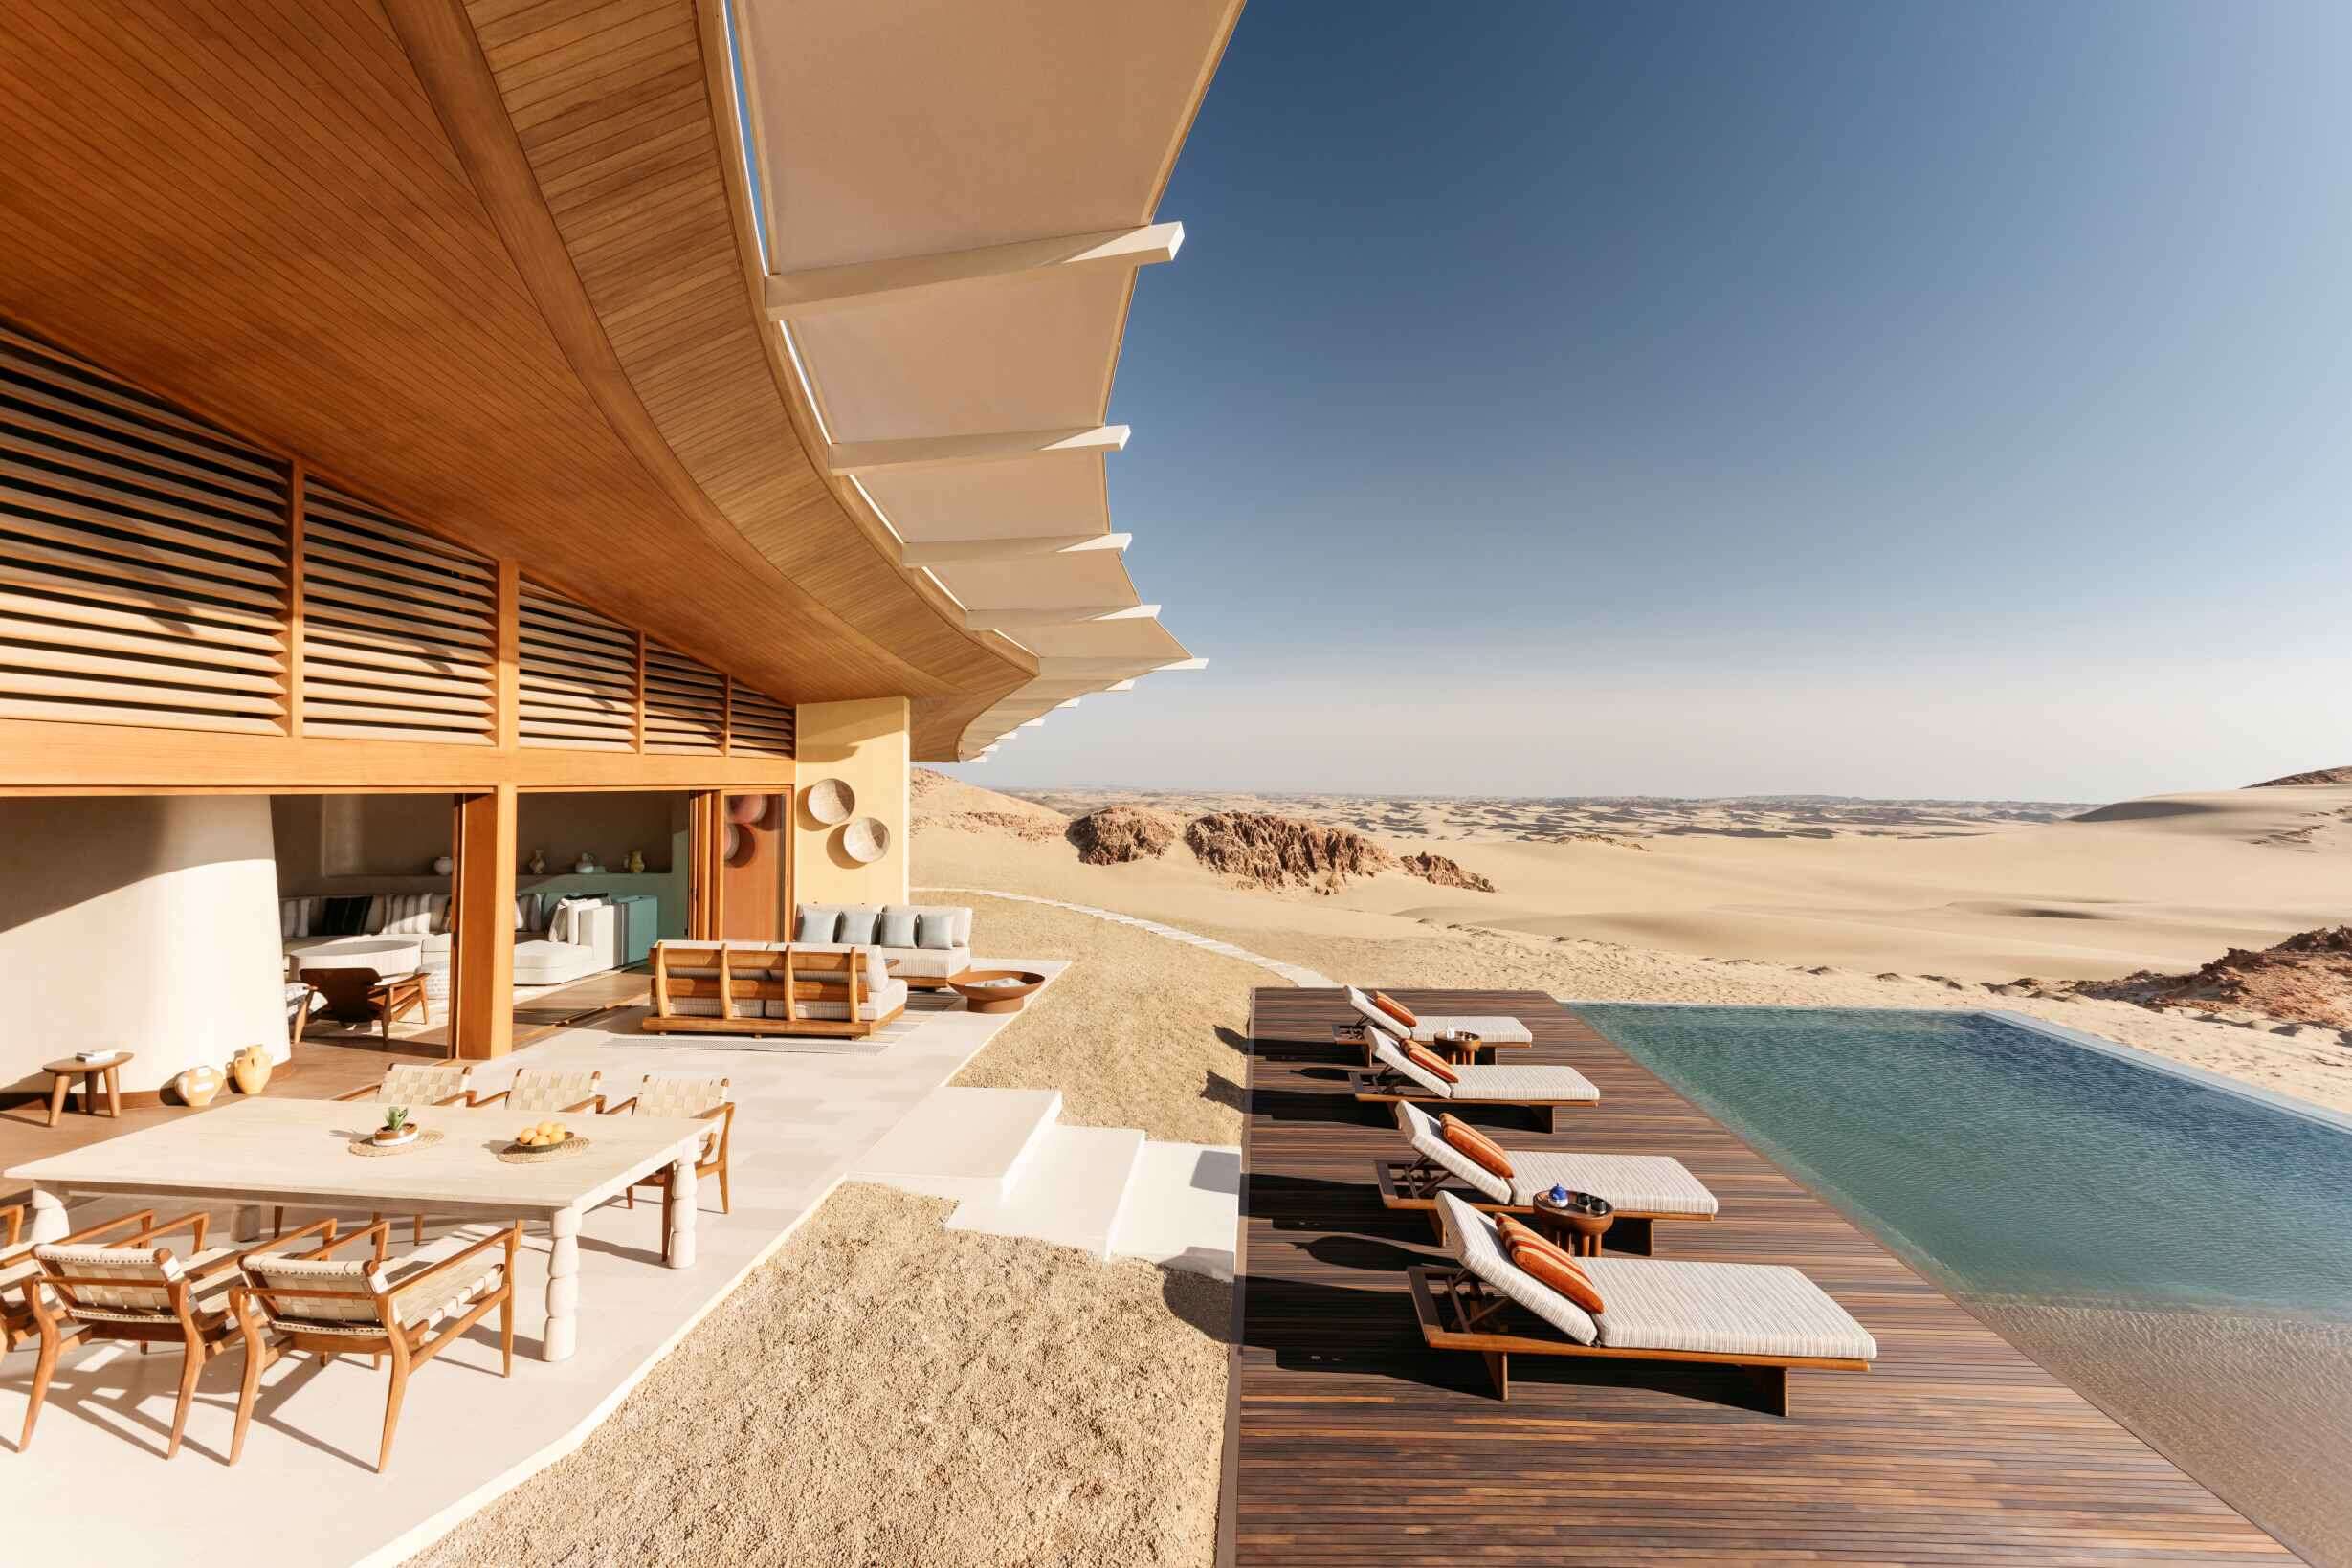 Six Senses Southern Dunes, The Red Sea: An Oasis of Serenity